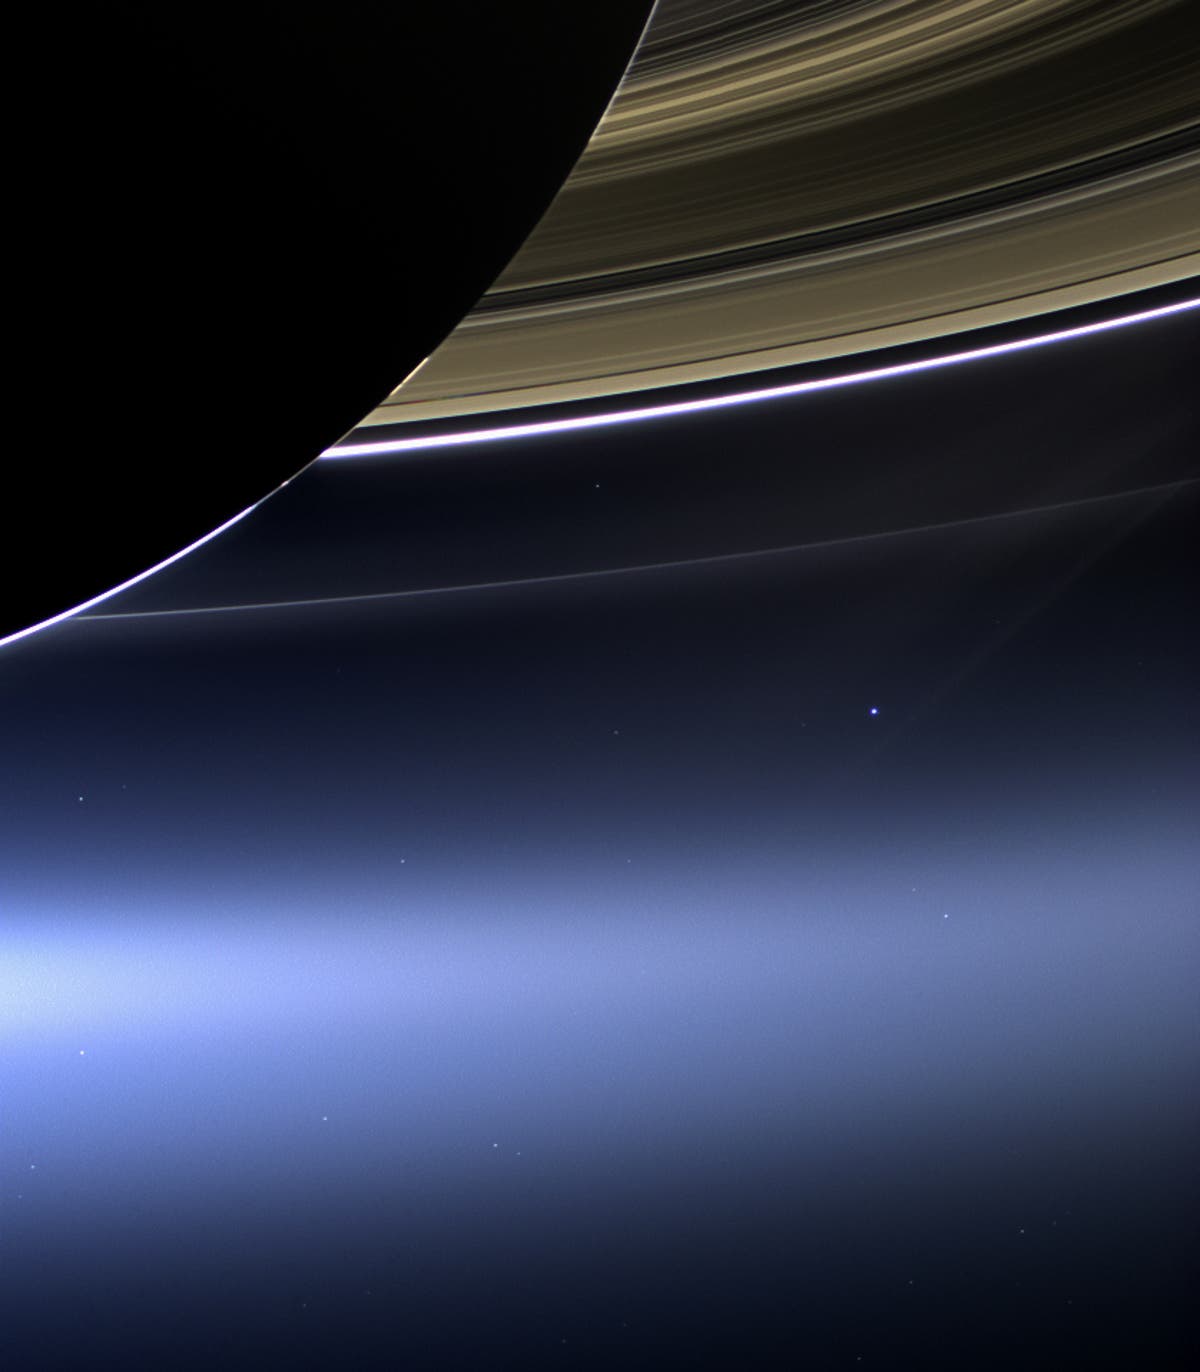 Nasa’s ‘Pale Blue Dot’ recalls Cold War tensions between Russia and the West